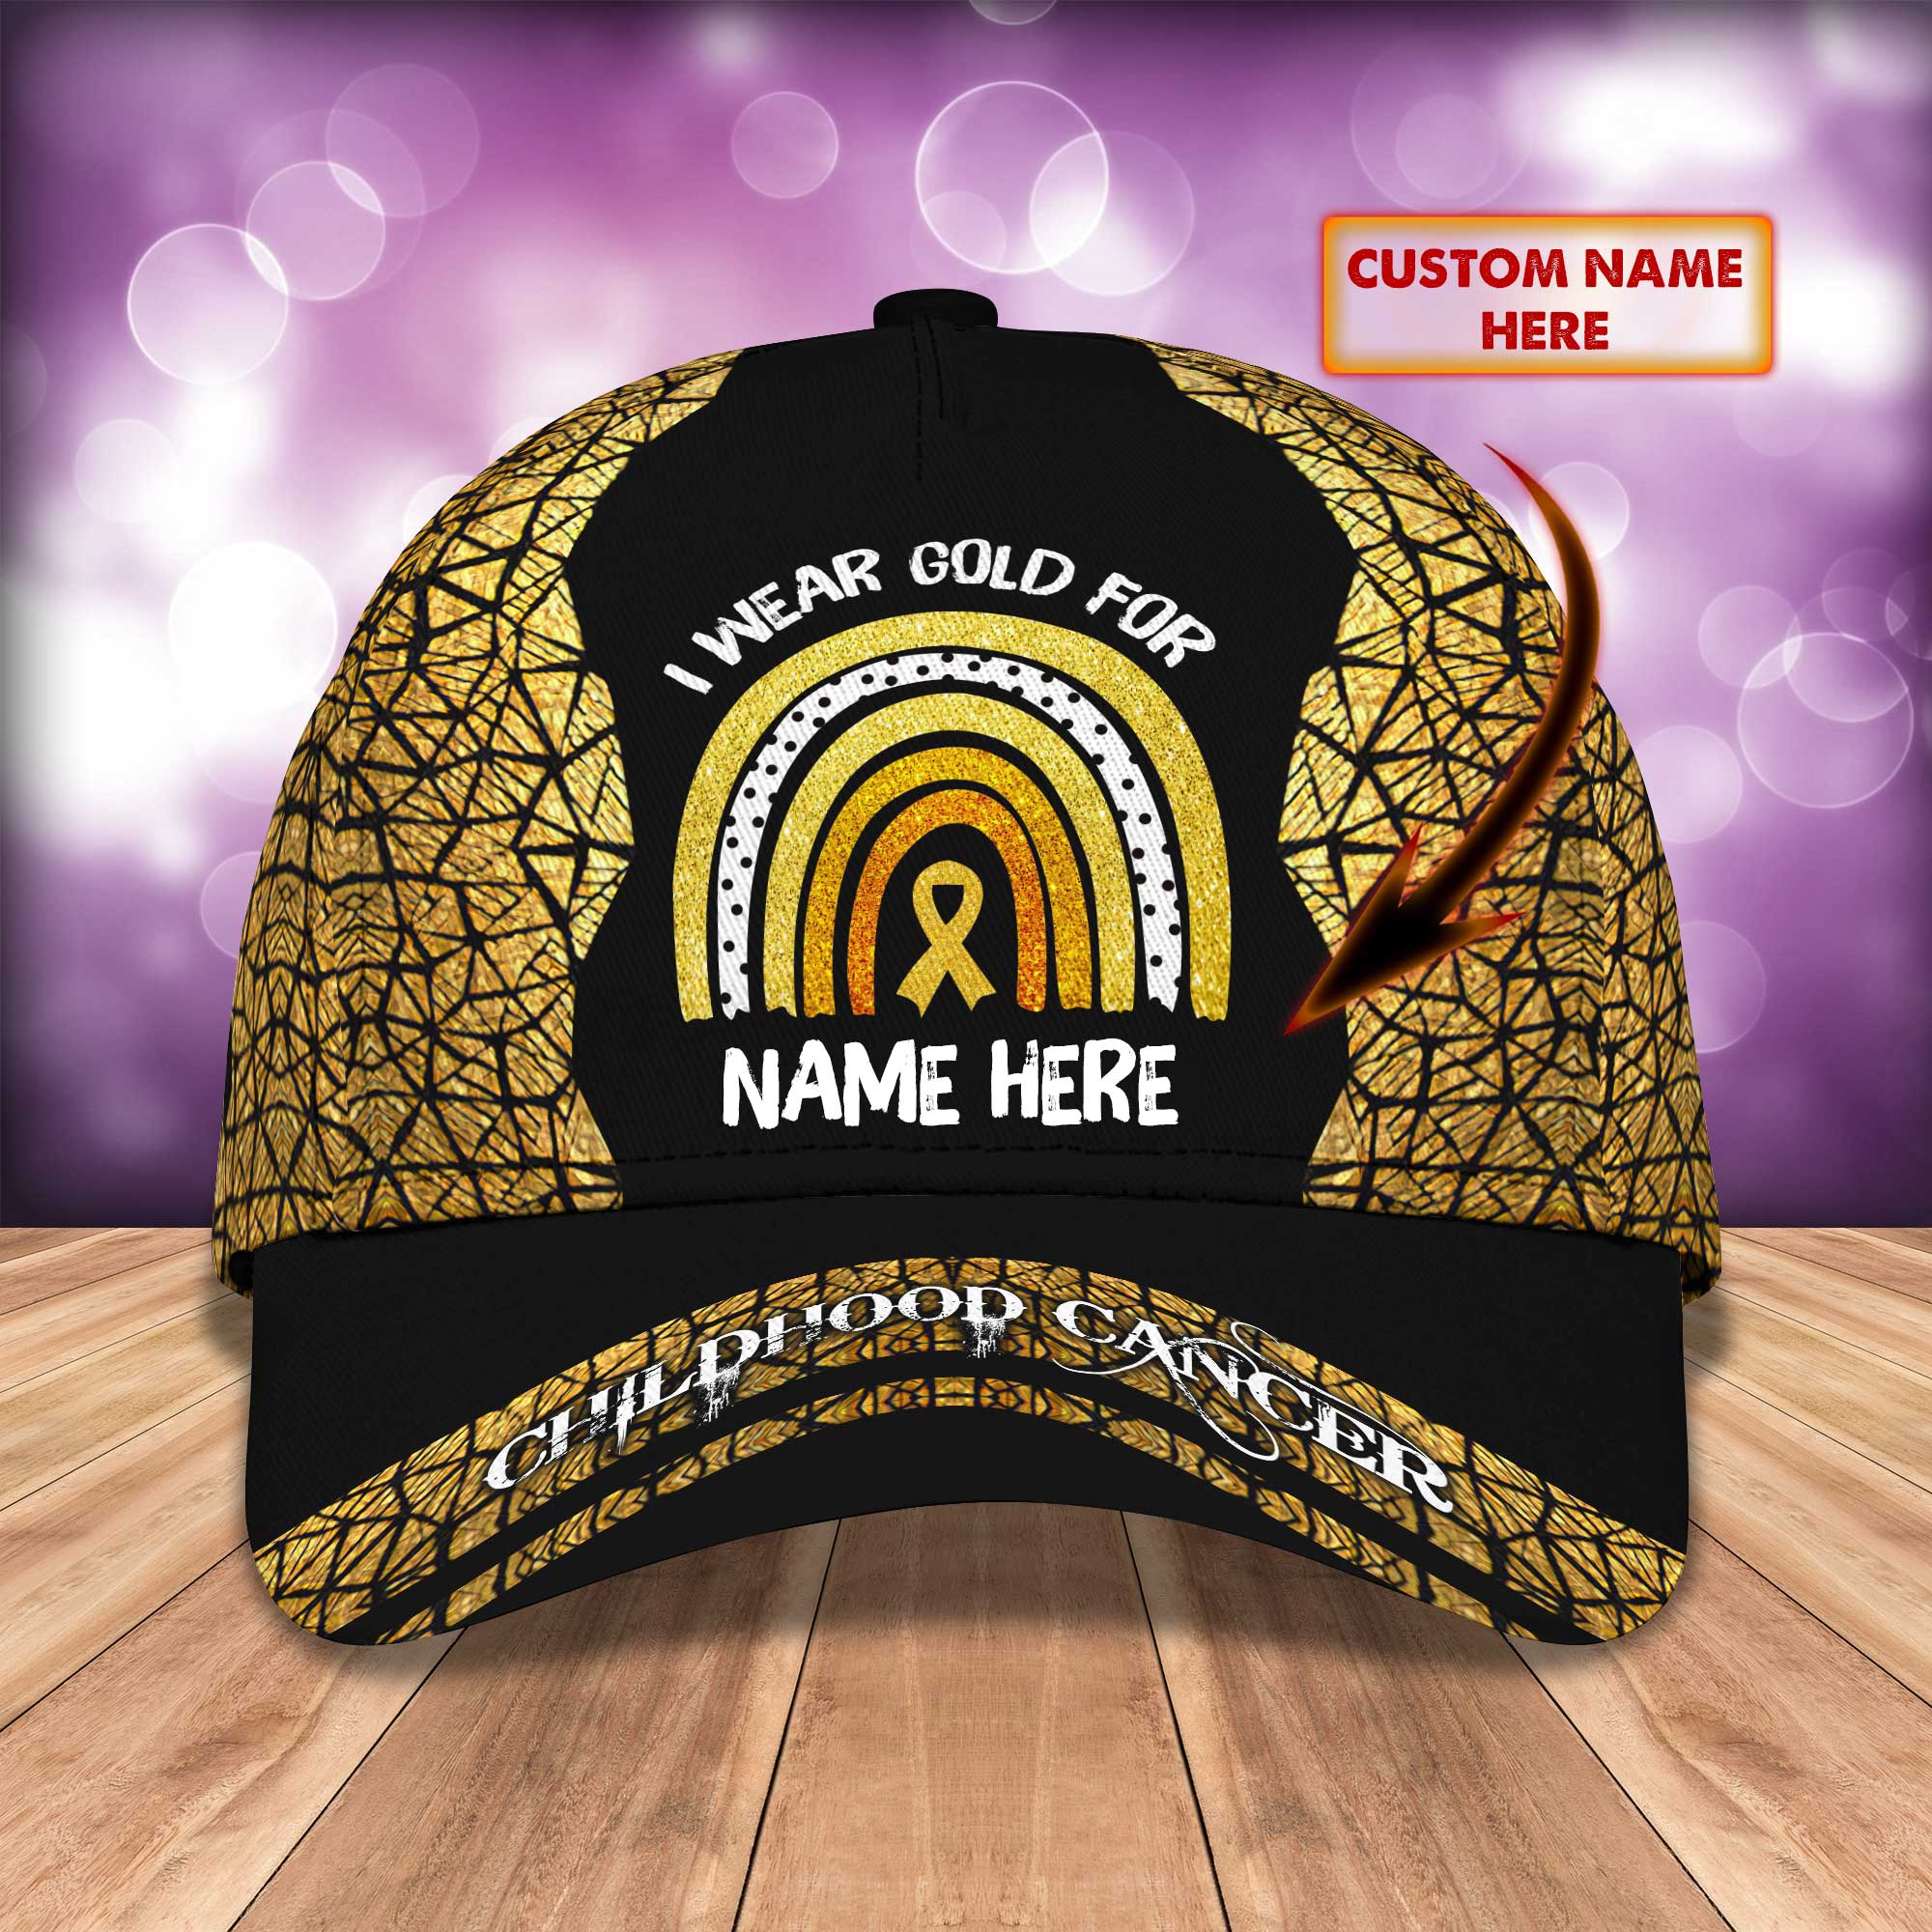 Childhood Cancer Awareness - Personalized Name Cap - Nmd 18